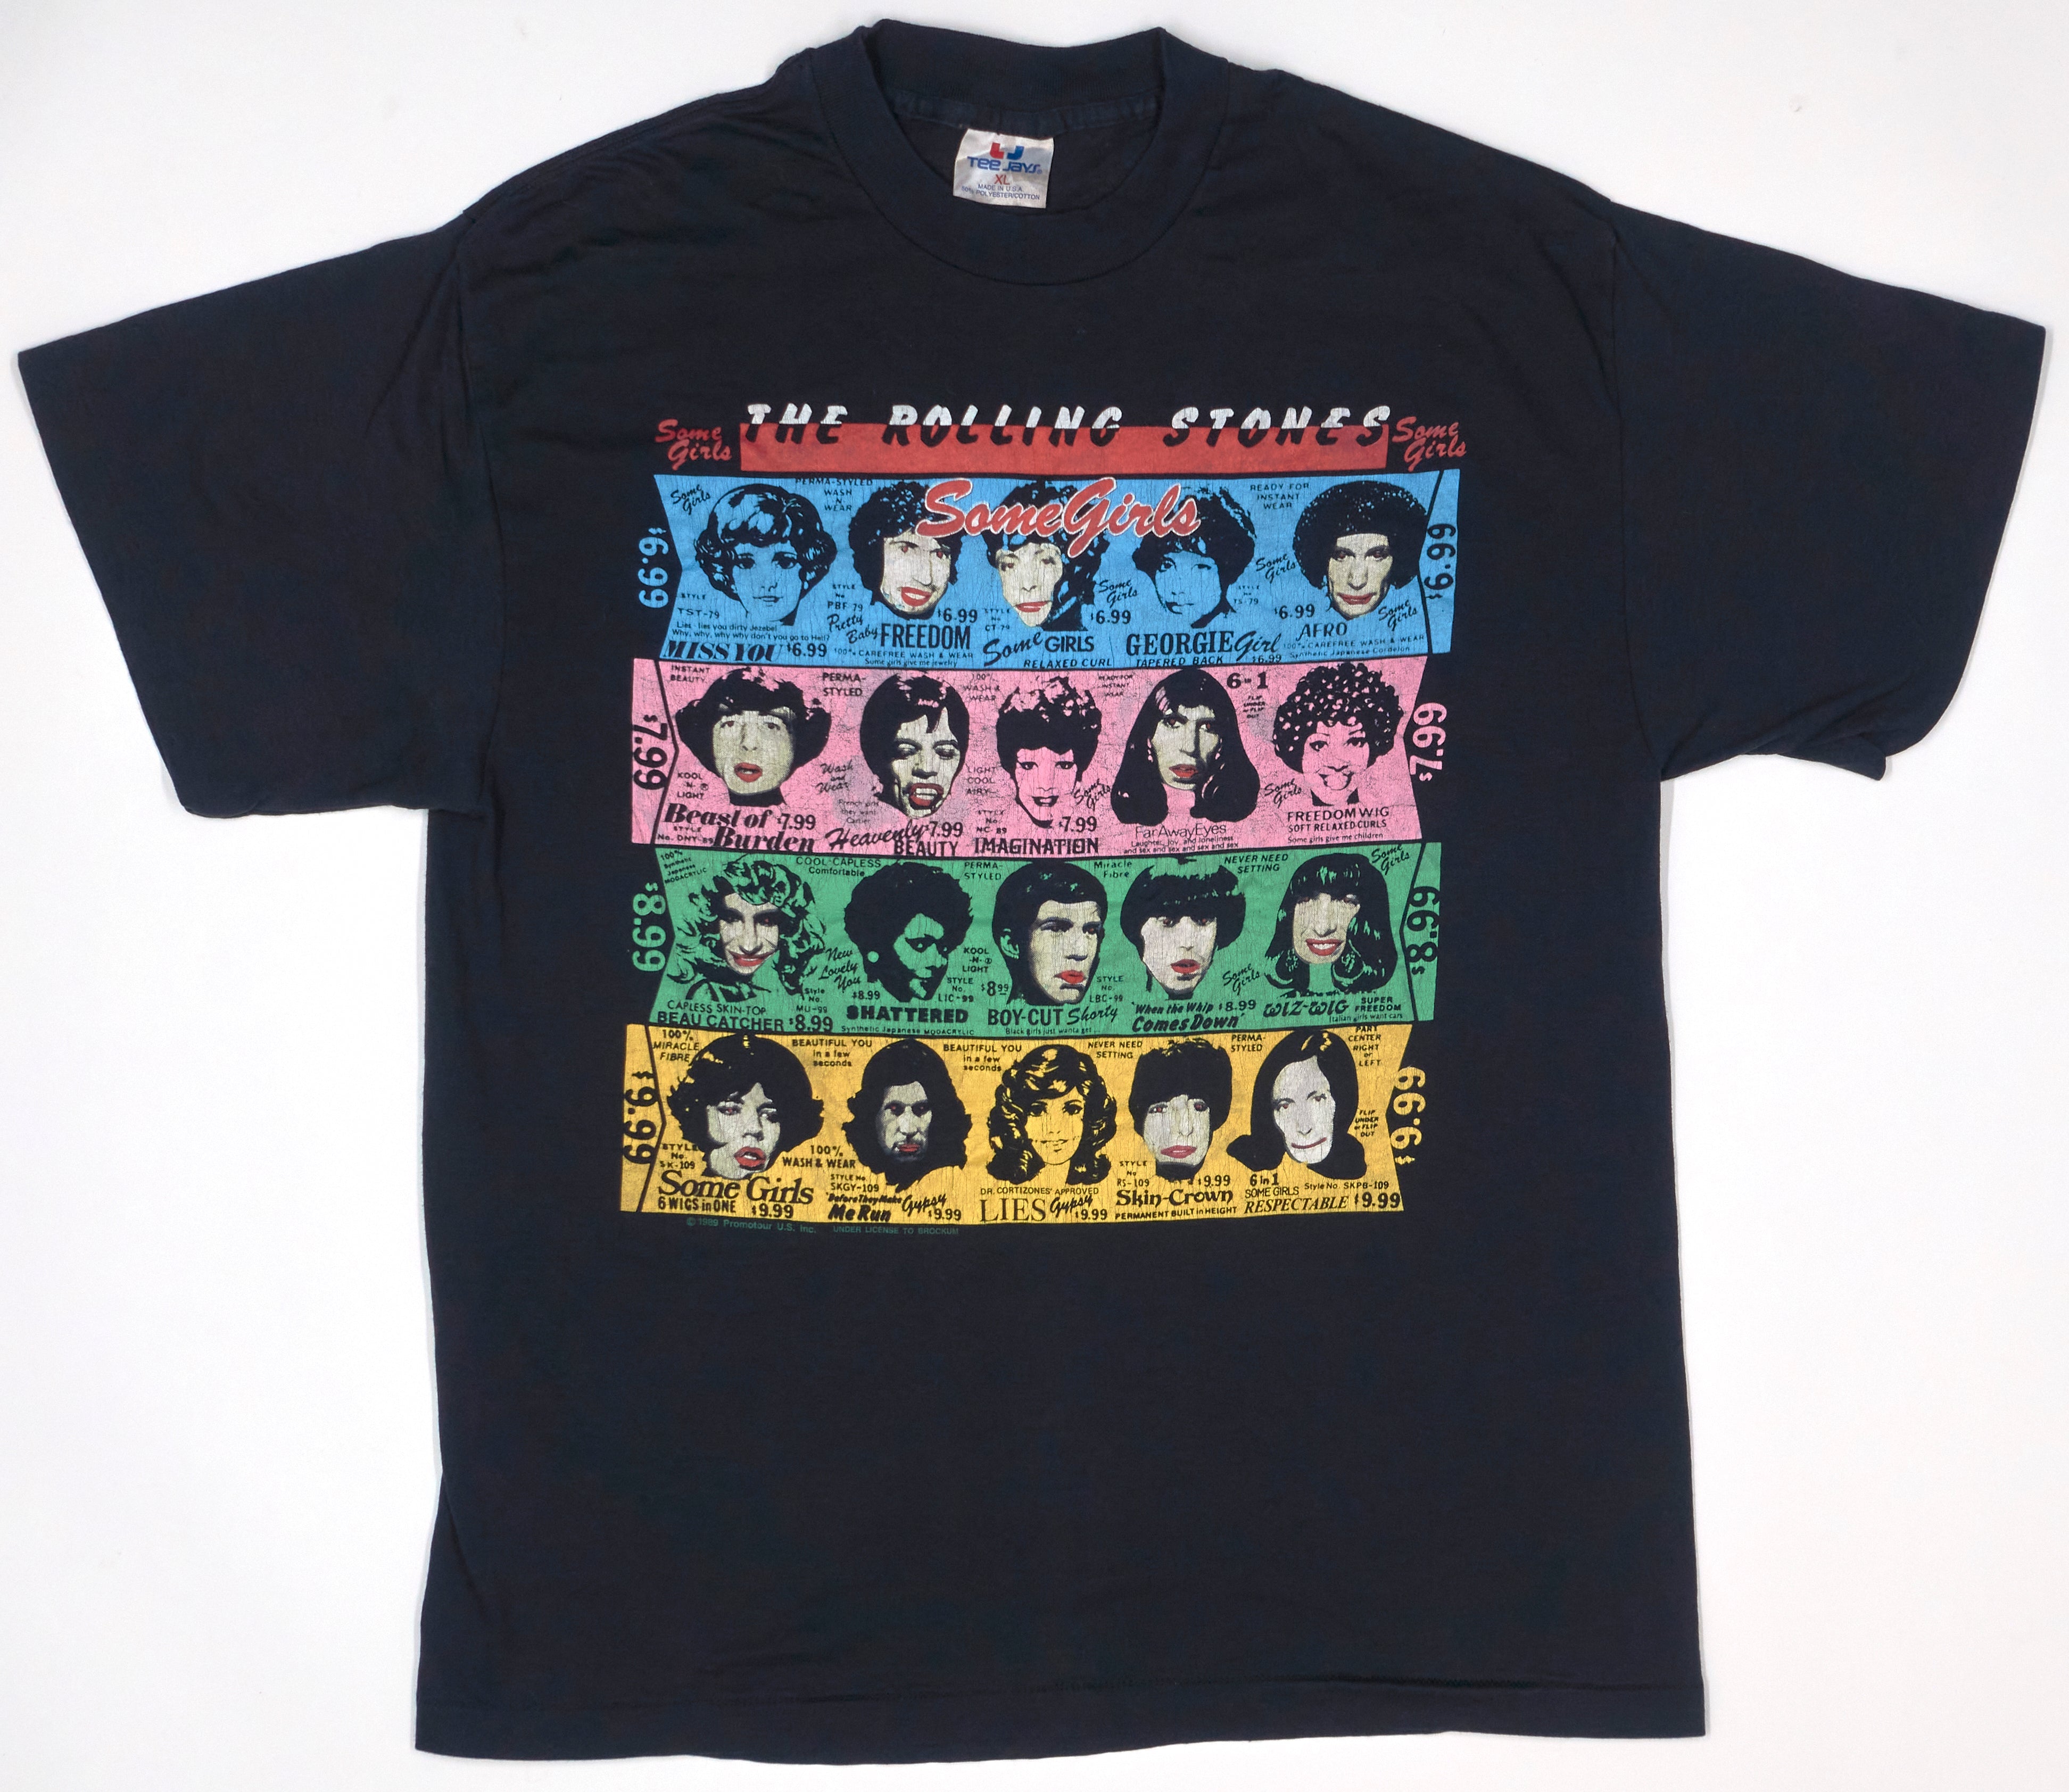 The Rolling Stones – Some Girls ©1989 Tour Shirt Size XL